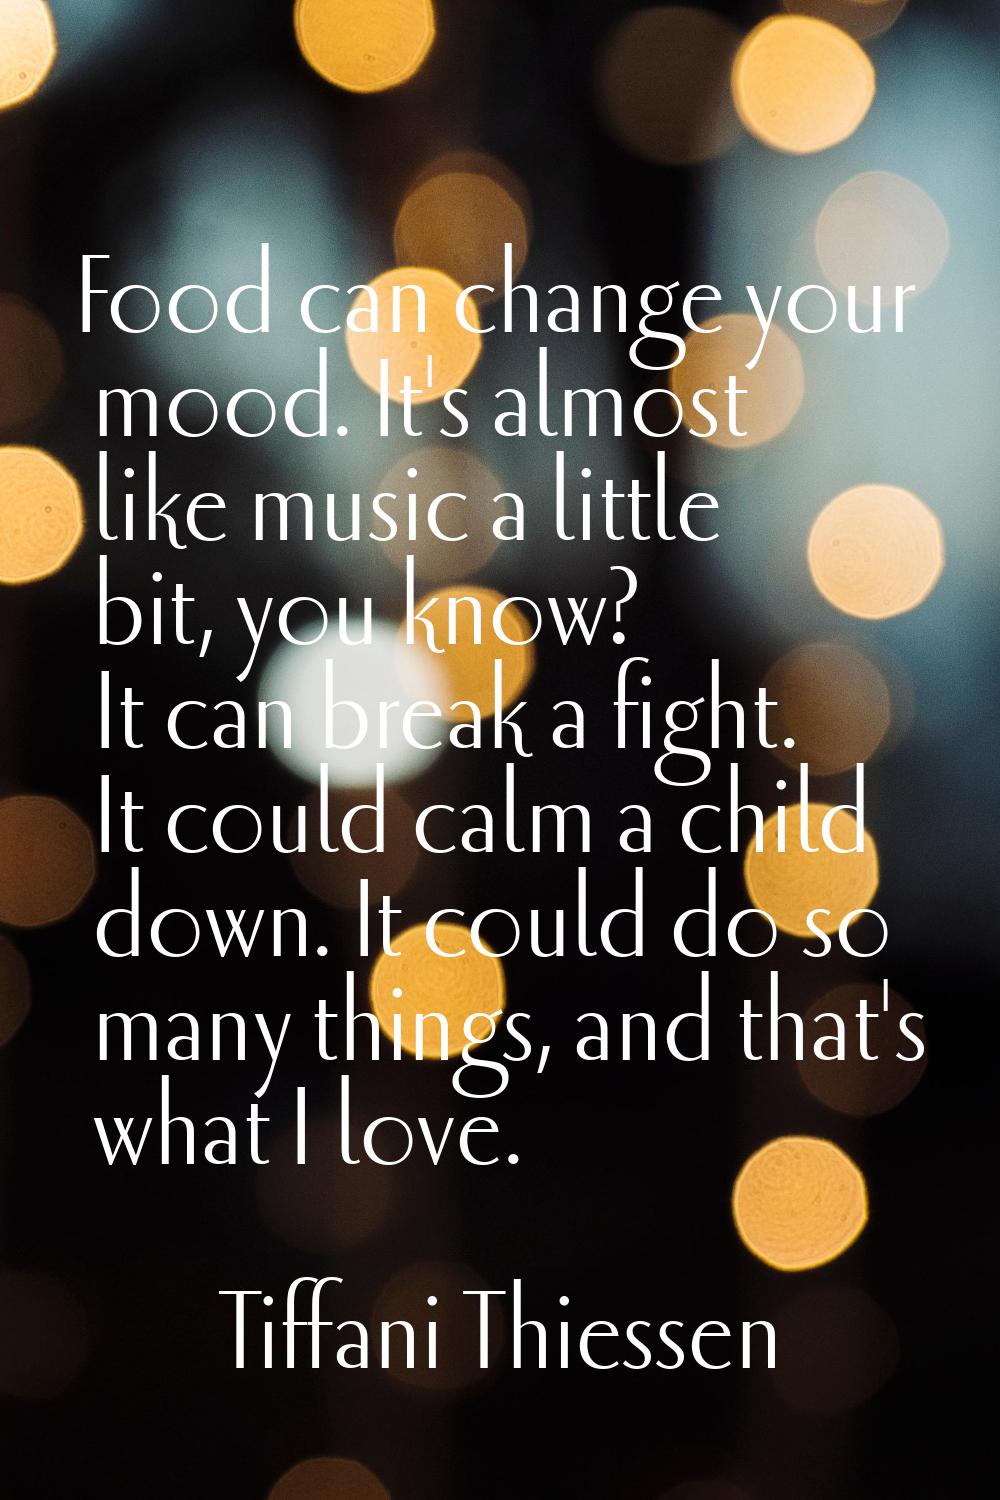 Food can change your mood. It's almost like music a little bit, you know? It can break a fight. It 